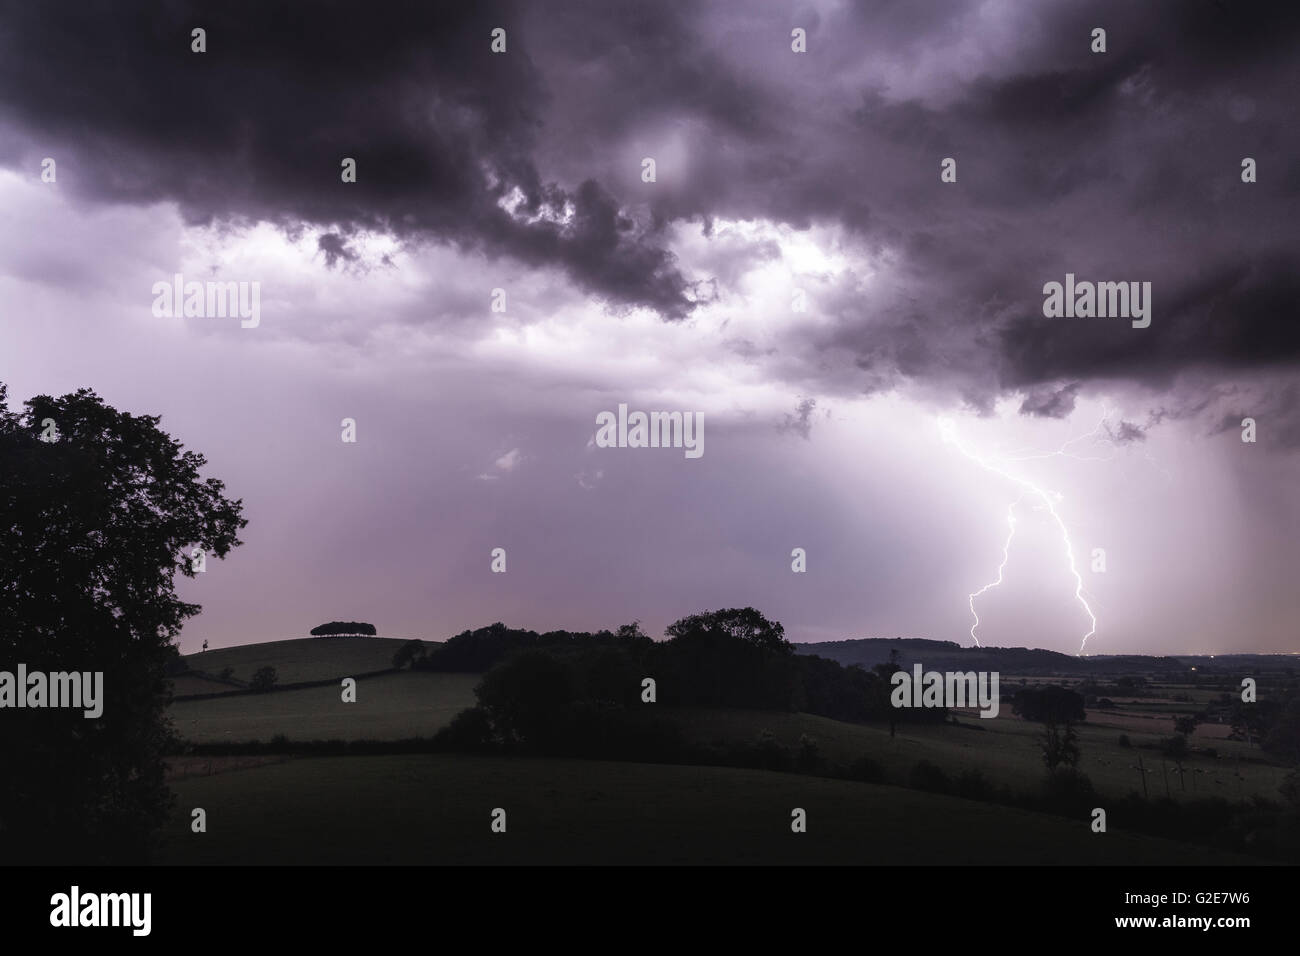 Purple Lightning Over Rural Countryside at Dusk Stock Photo